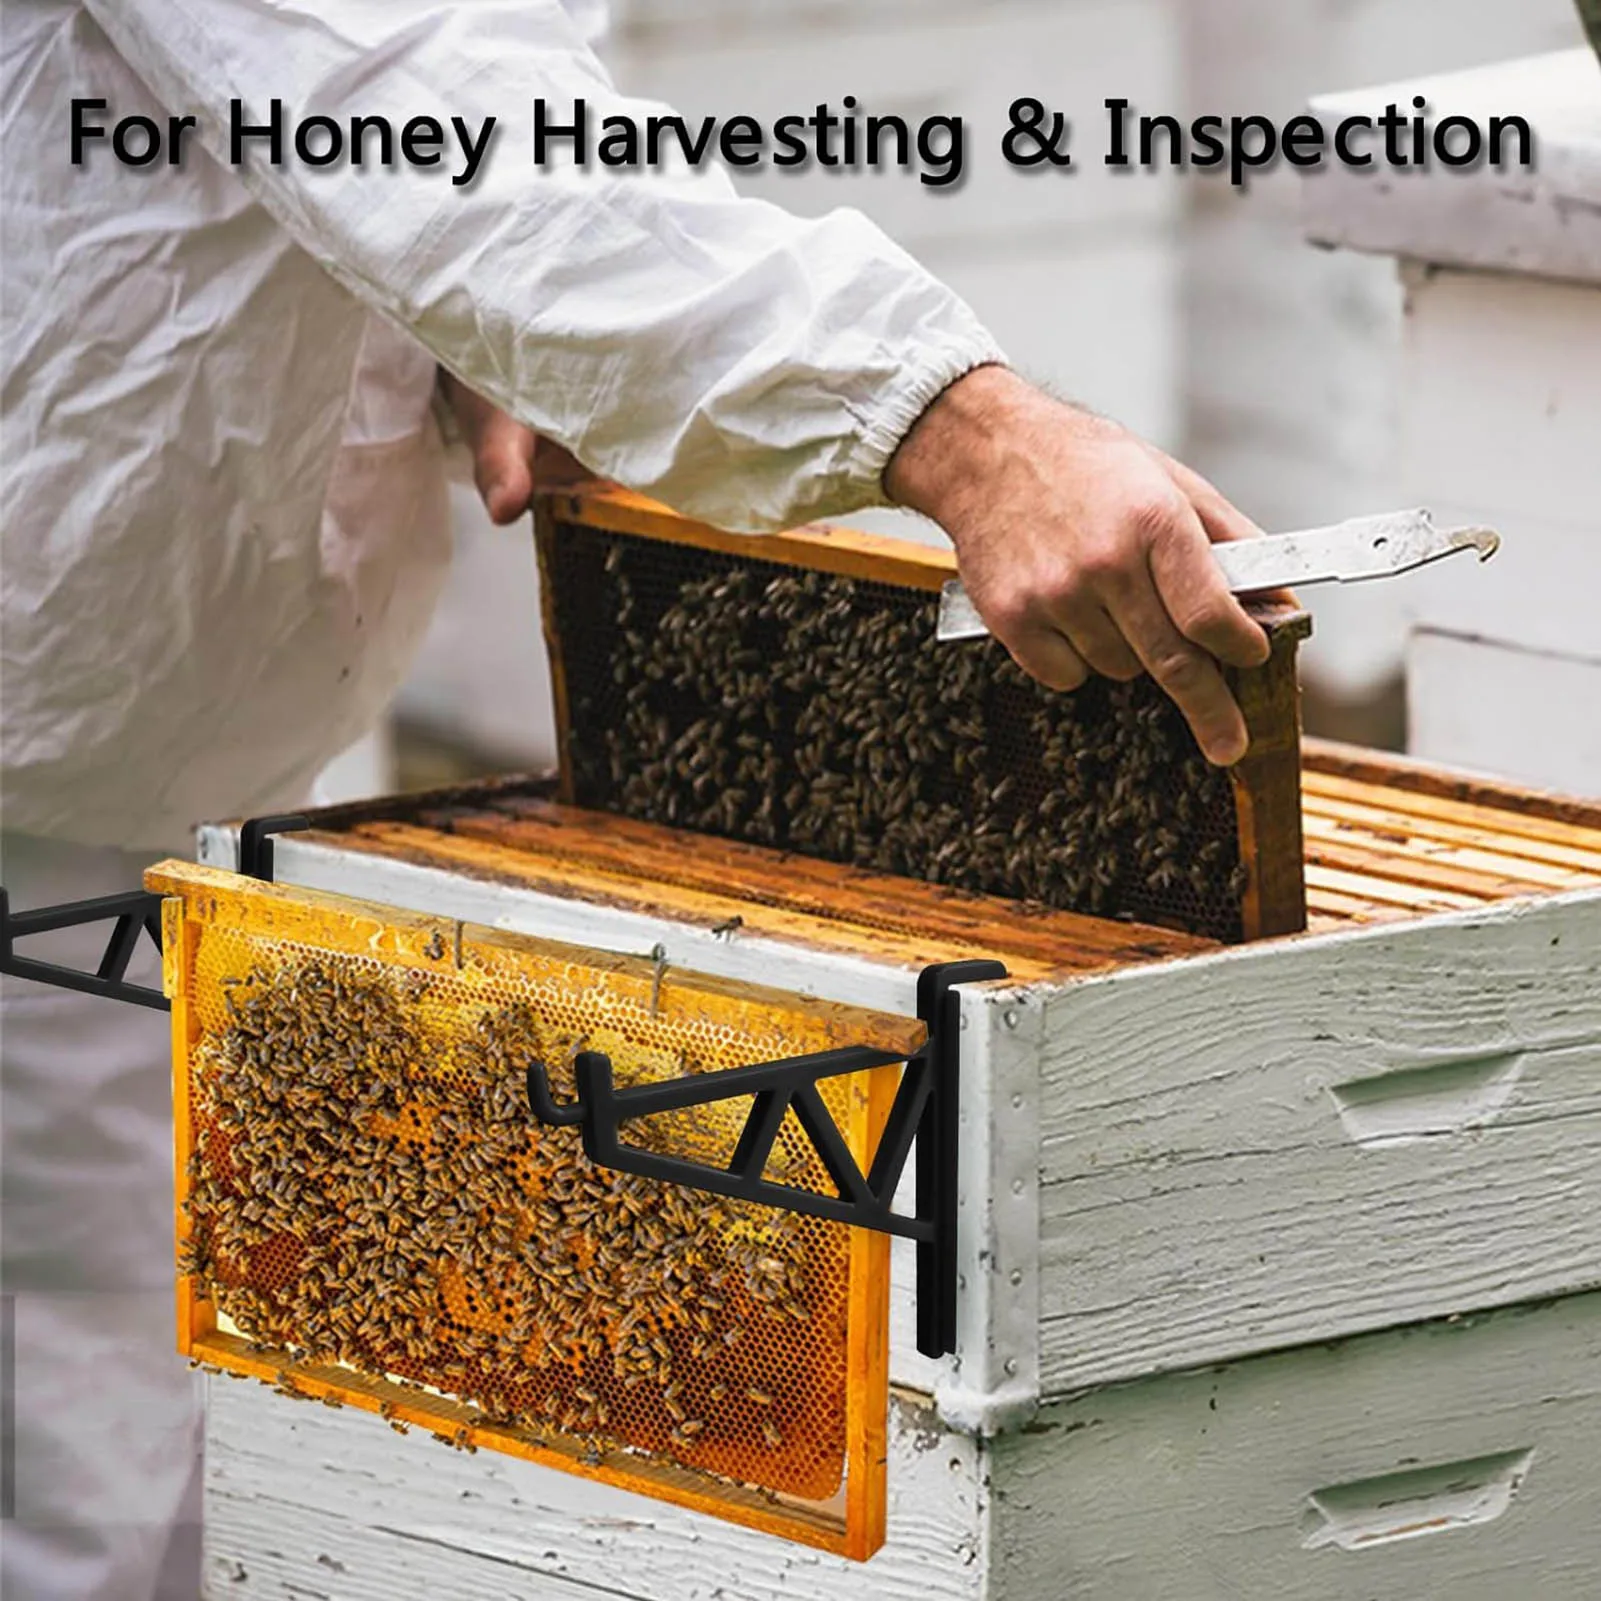 

Beehive Harvesting Holder Strong Grip Design Pour Easily for Outdoor Beekeeper Workshops